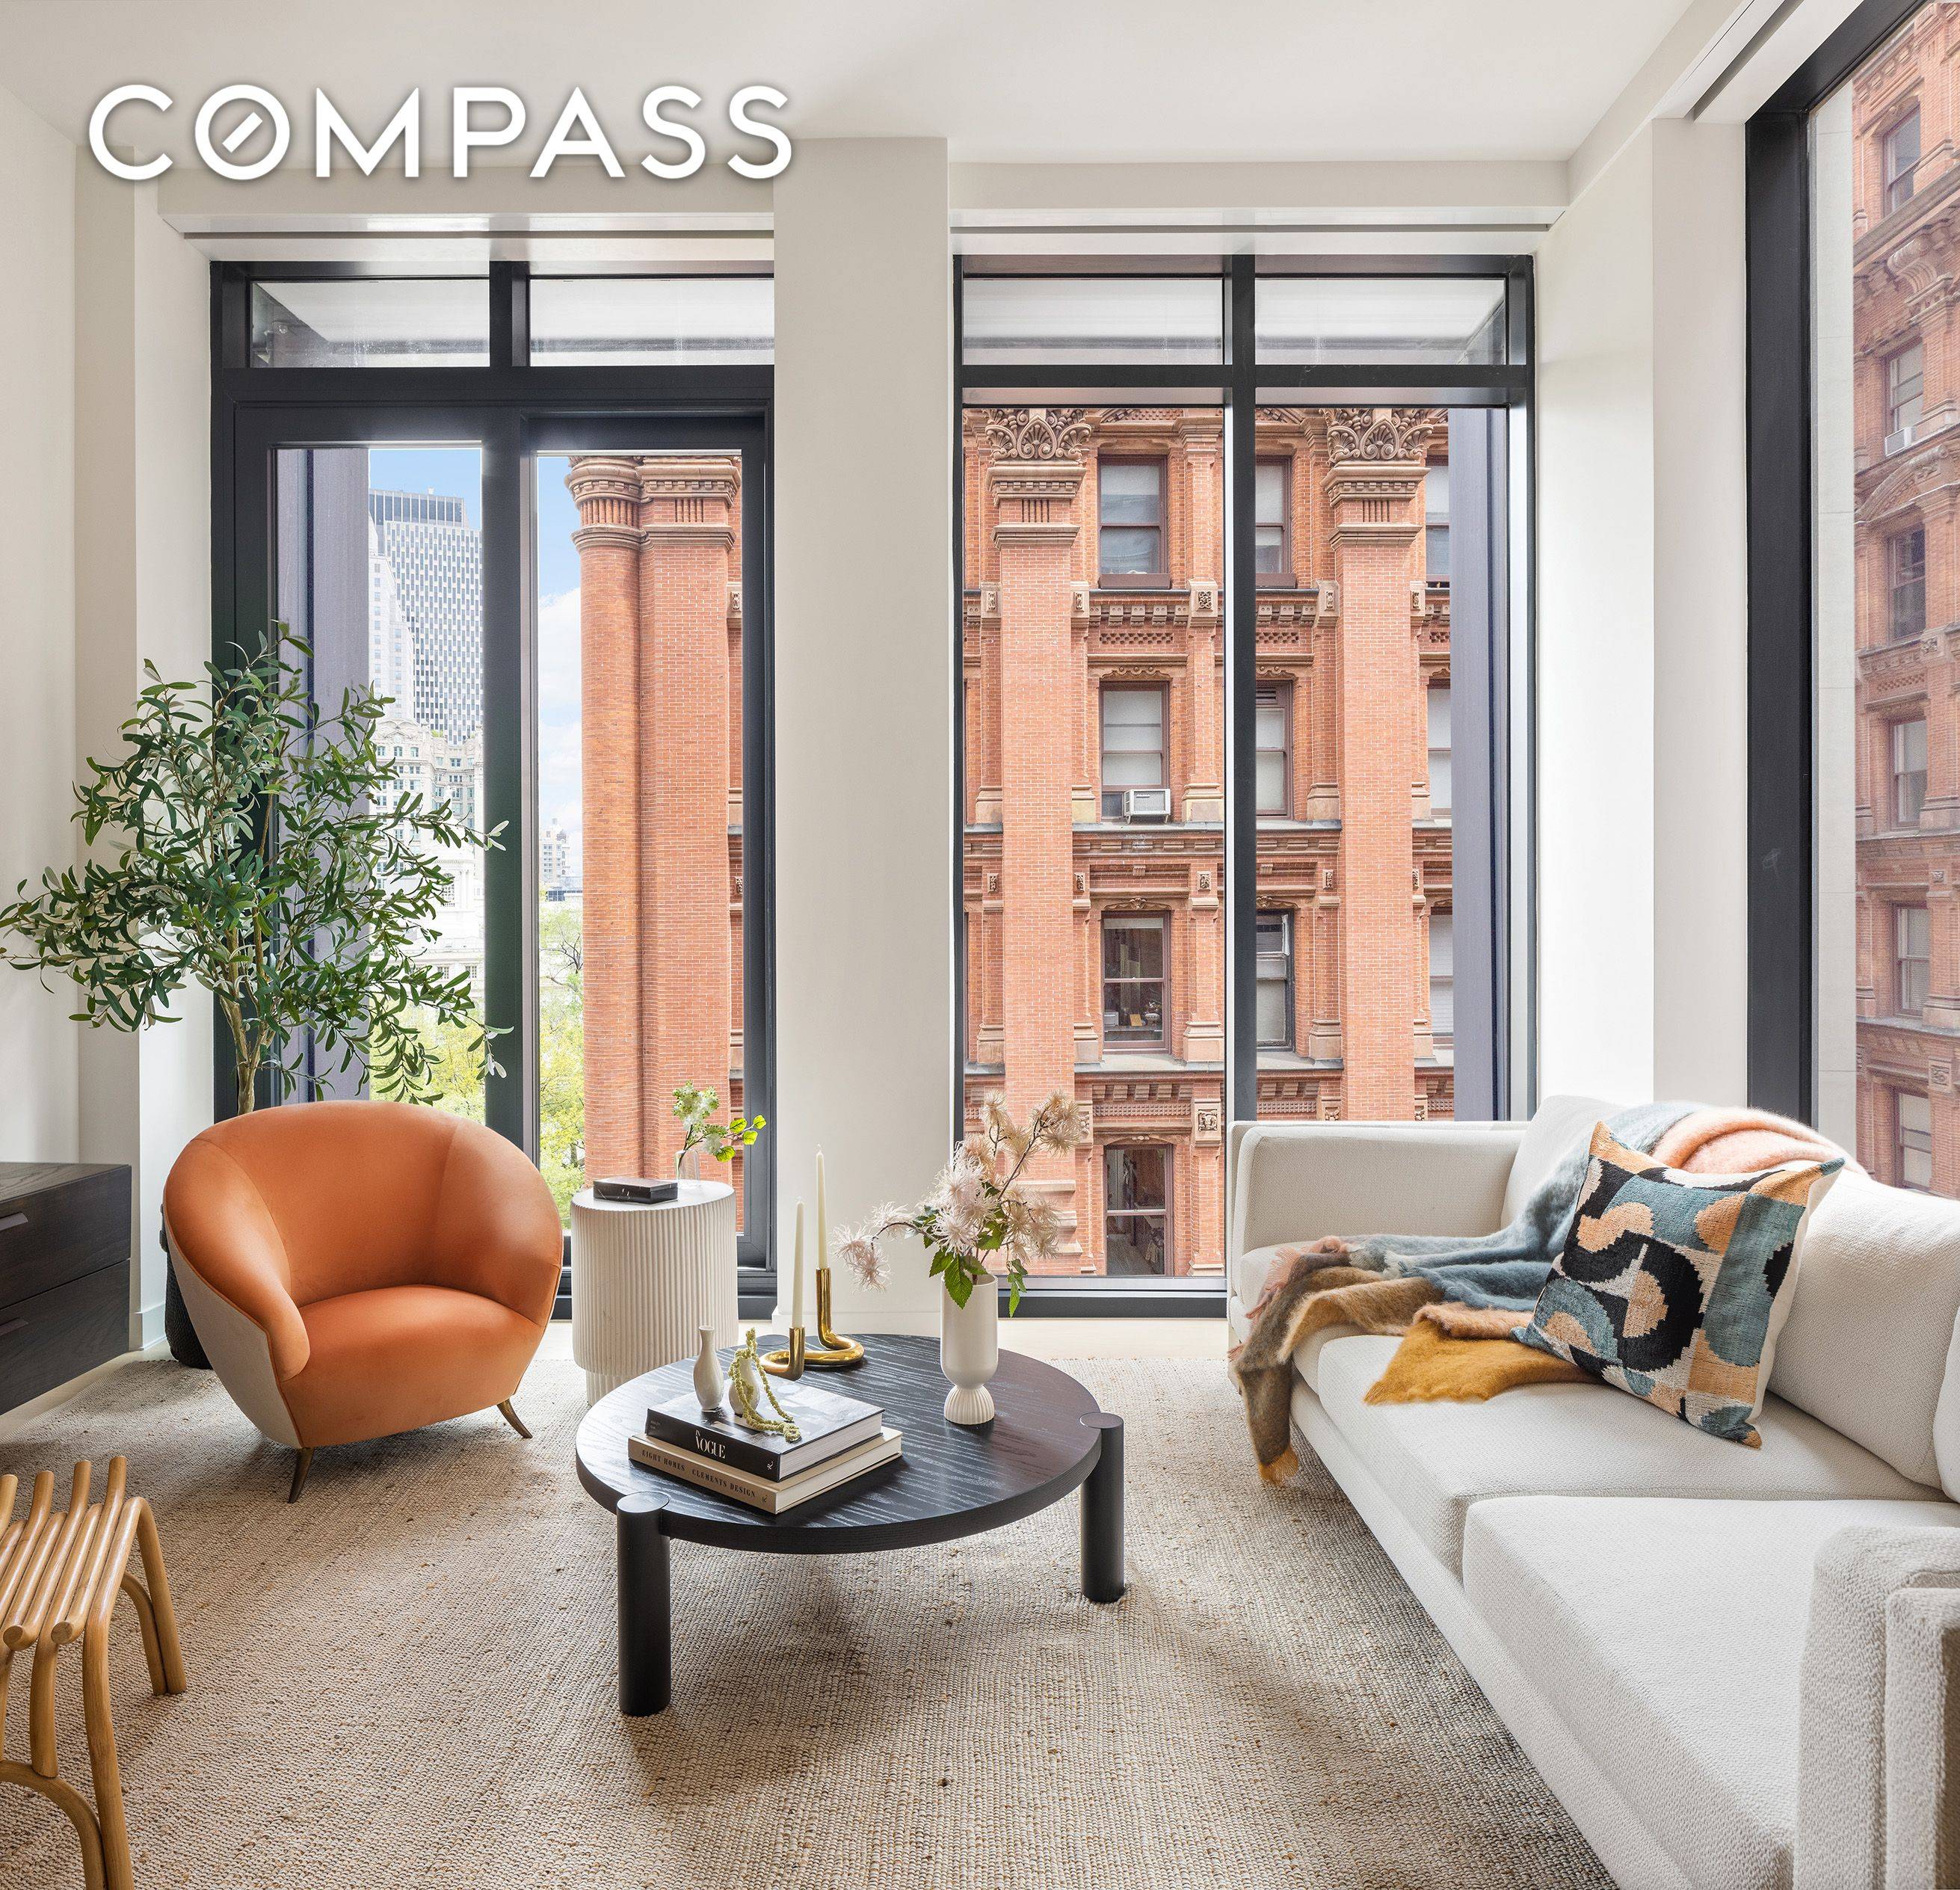 Immediate Occupancy ! Overlooking Tribeca and City Hall Park, this is the first residential property in New York City by Pritzker Prize winning architect Richard Rogers, Rogers Stirk Harbour Partners.